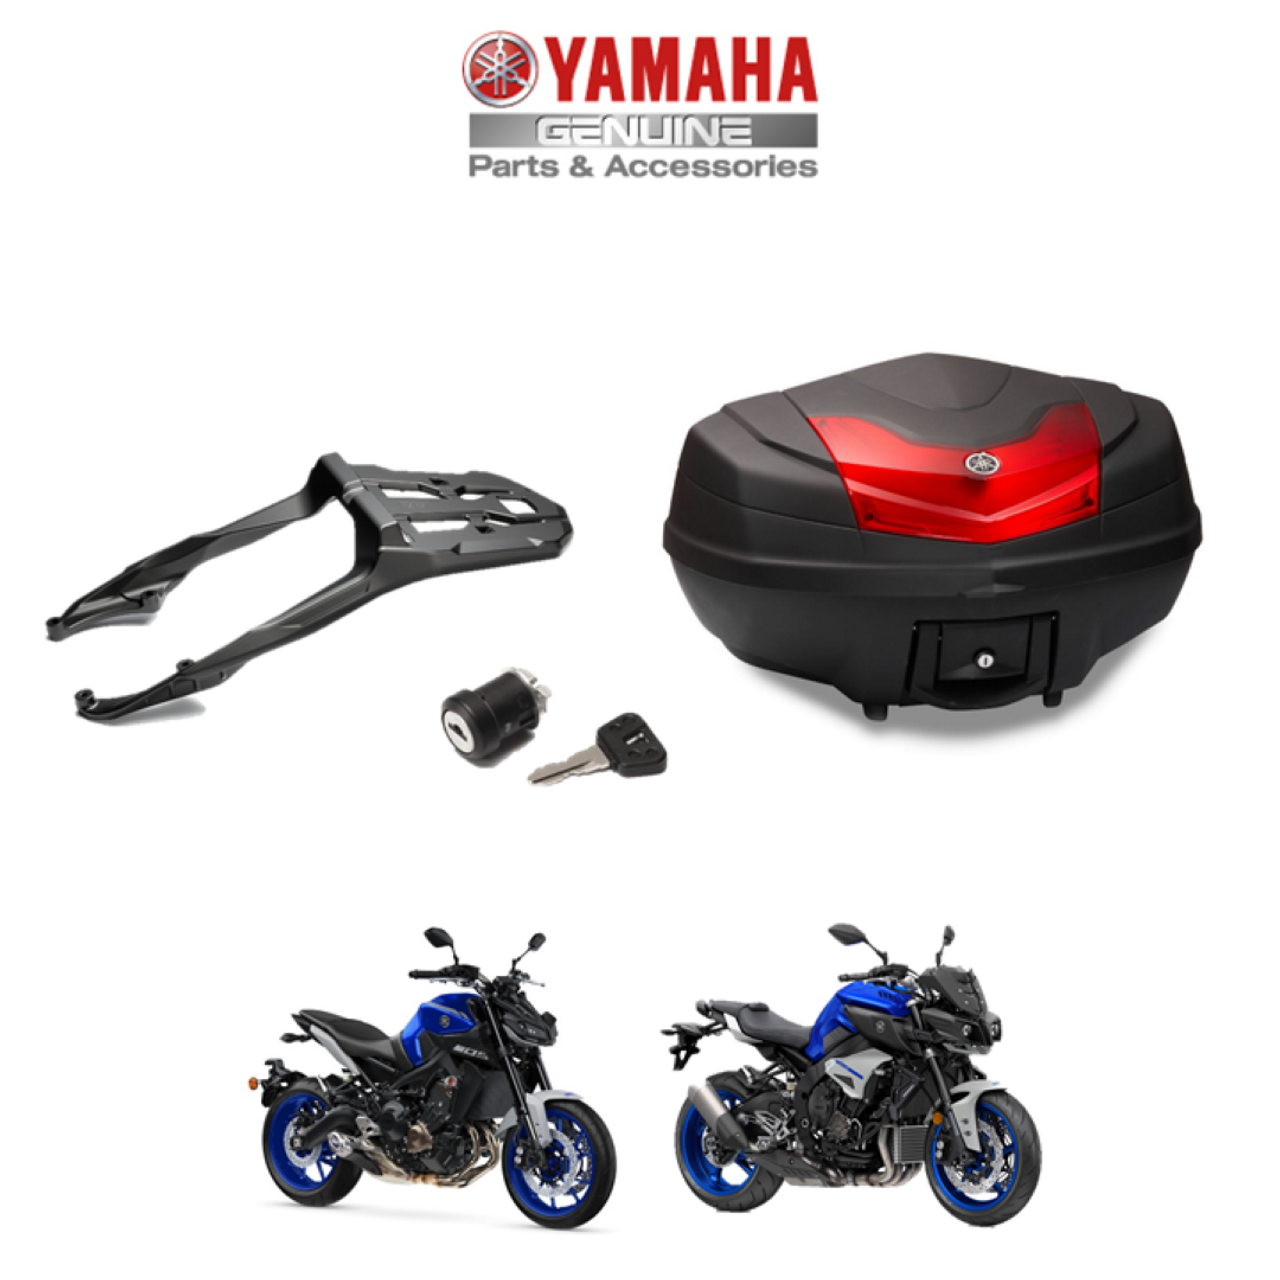 Genuine Yamaha MT-09 to 2020 & MT-10 50l Top Box Luggage Kit for Sale | Flitwick Motorcycles